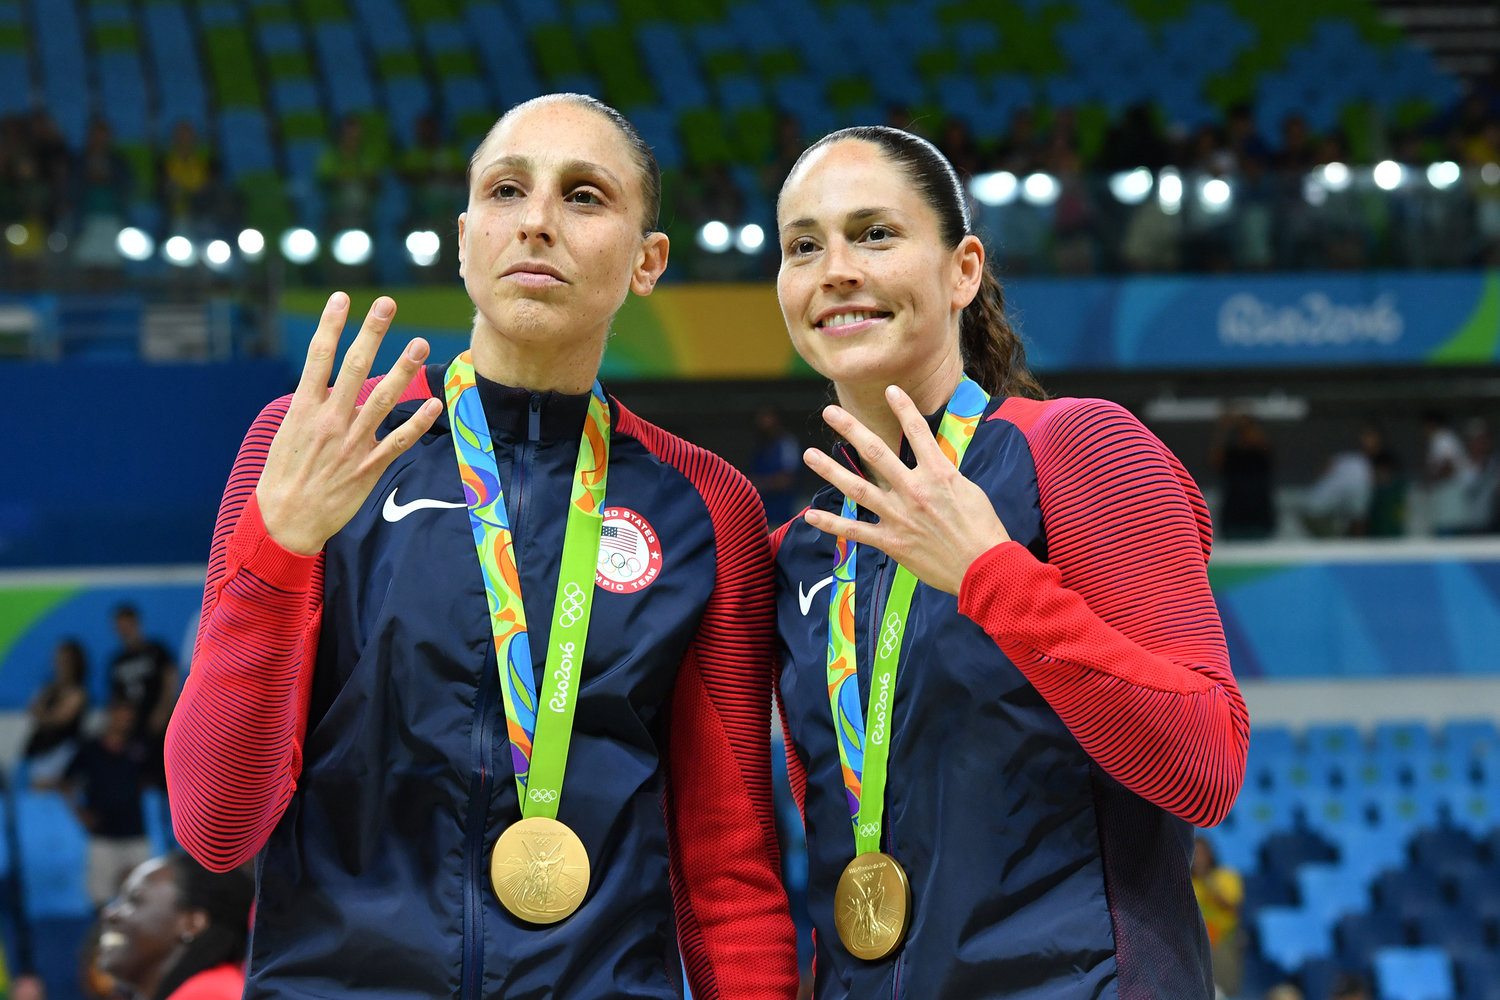 Diana Taurasi, left, and Sue Bird pose with their gold medals after the U.S. women's basketball final during the Summer Olympics at Carioca Arena 1 in Rio de Janeiro on Aug. 20, 2016.